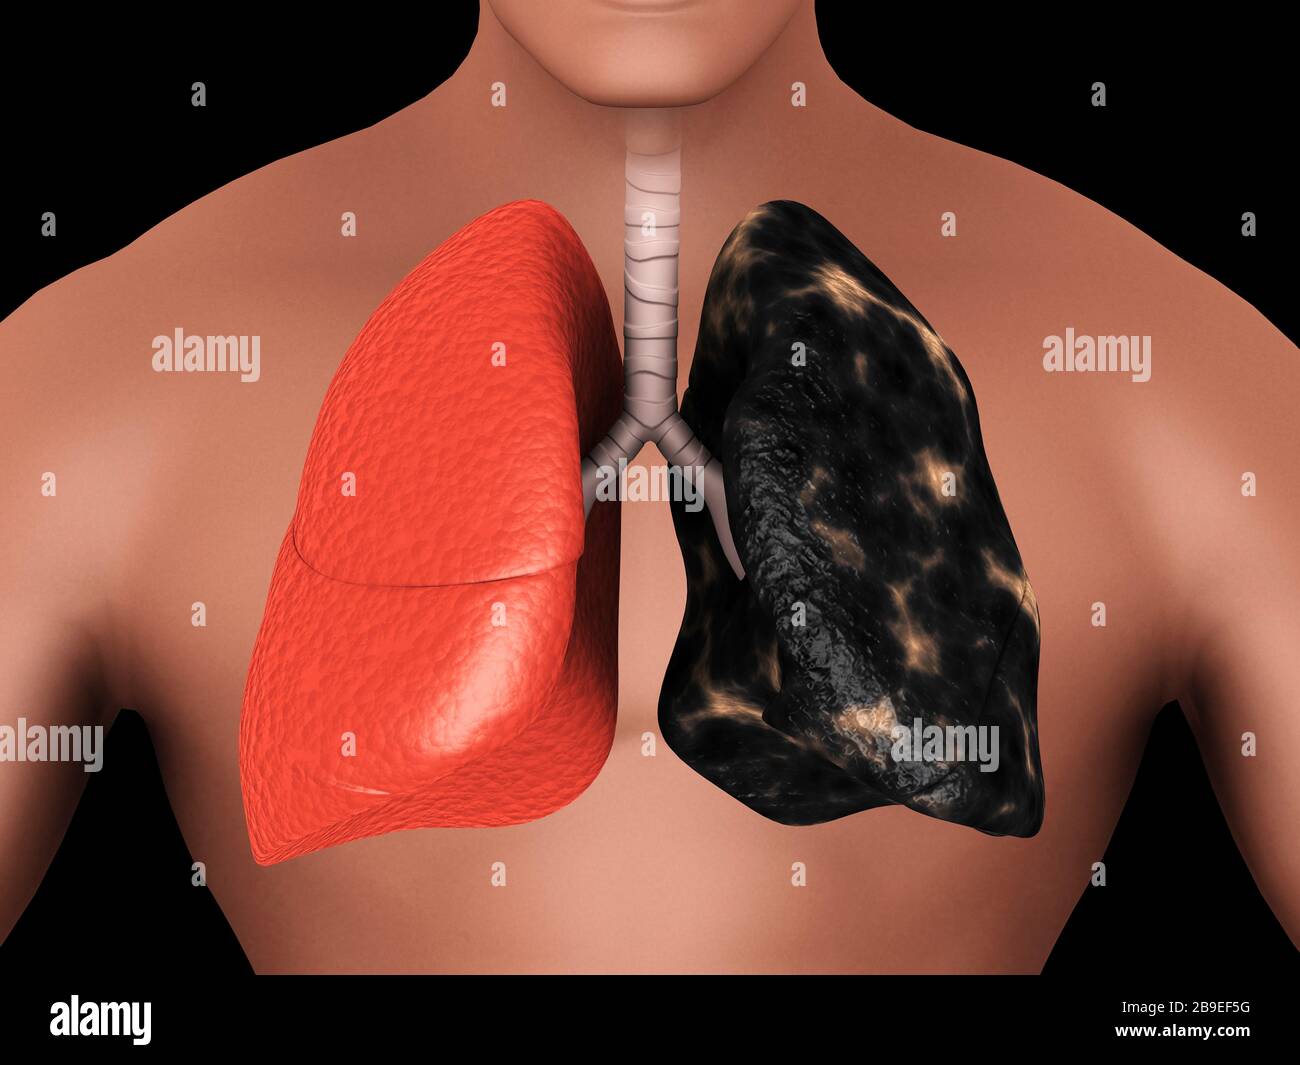 Comparison of a healthy lung vs. a smoker's lung. Stock Photo